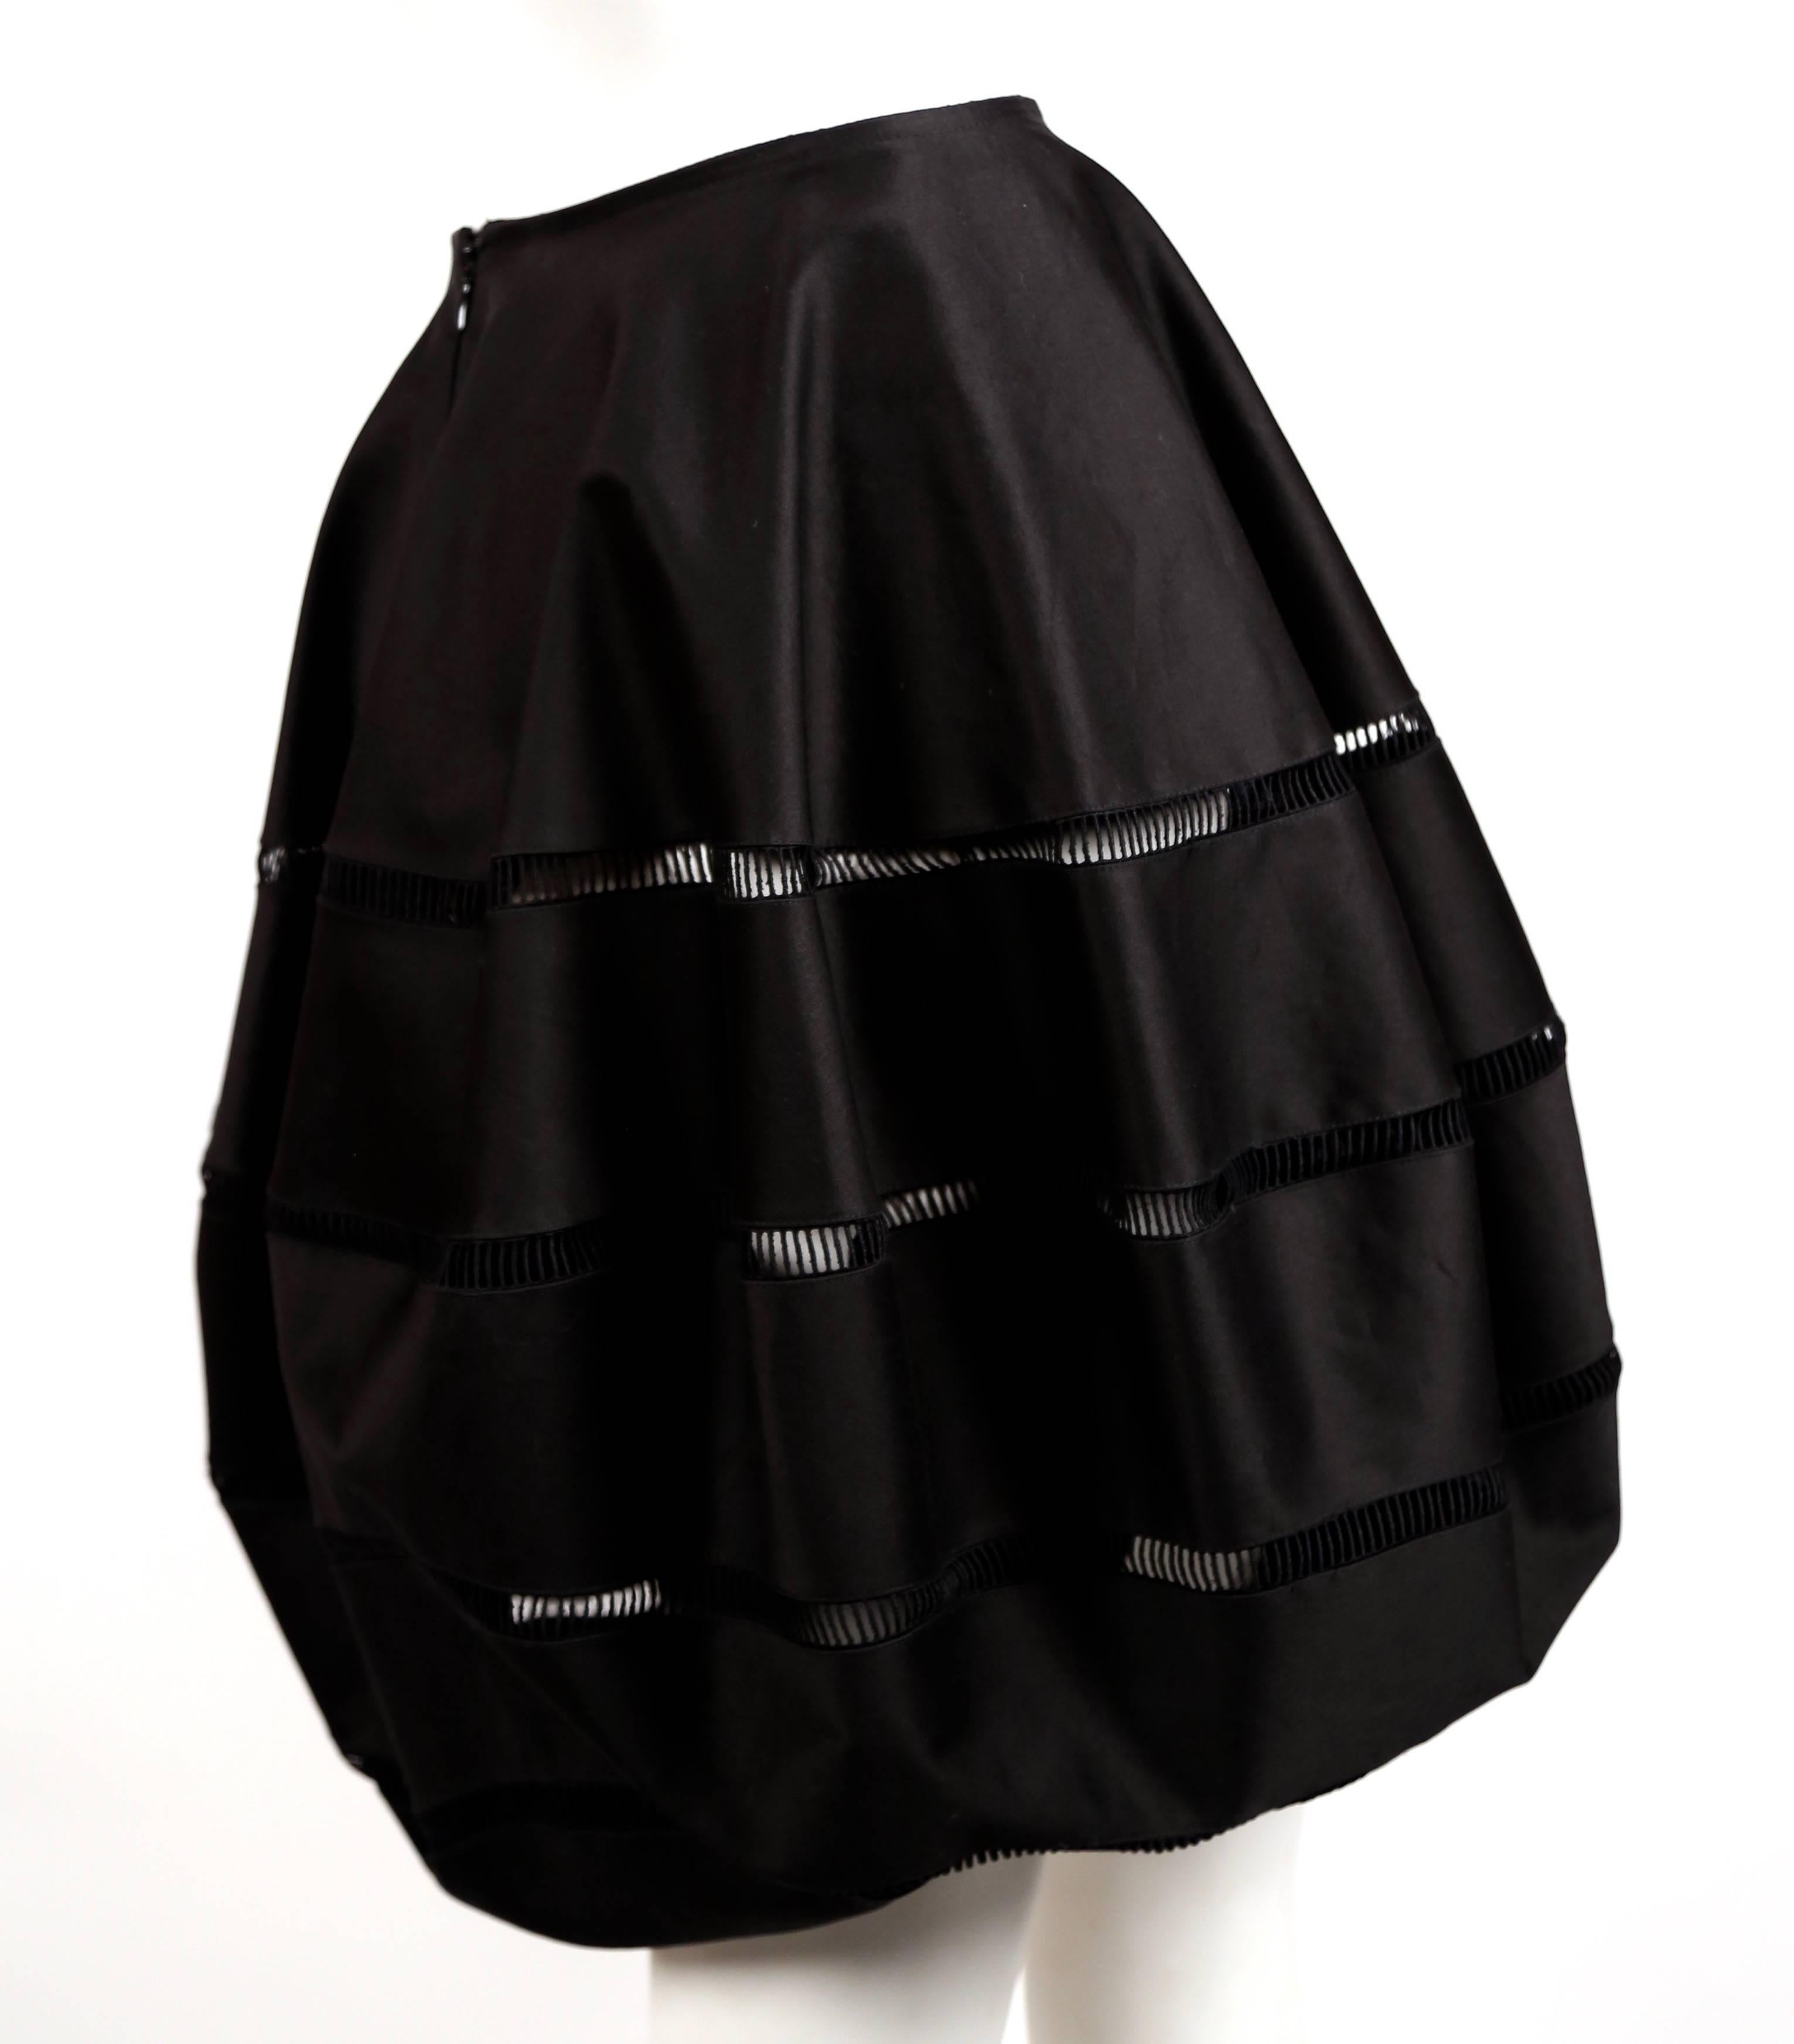 Black polished cotton bubble skirt with embroidered cut outs designed by Azzedine Alaia. Best fits a US size 2-4. Approximate measurements: waist laying flat 25